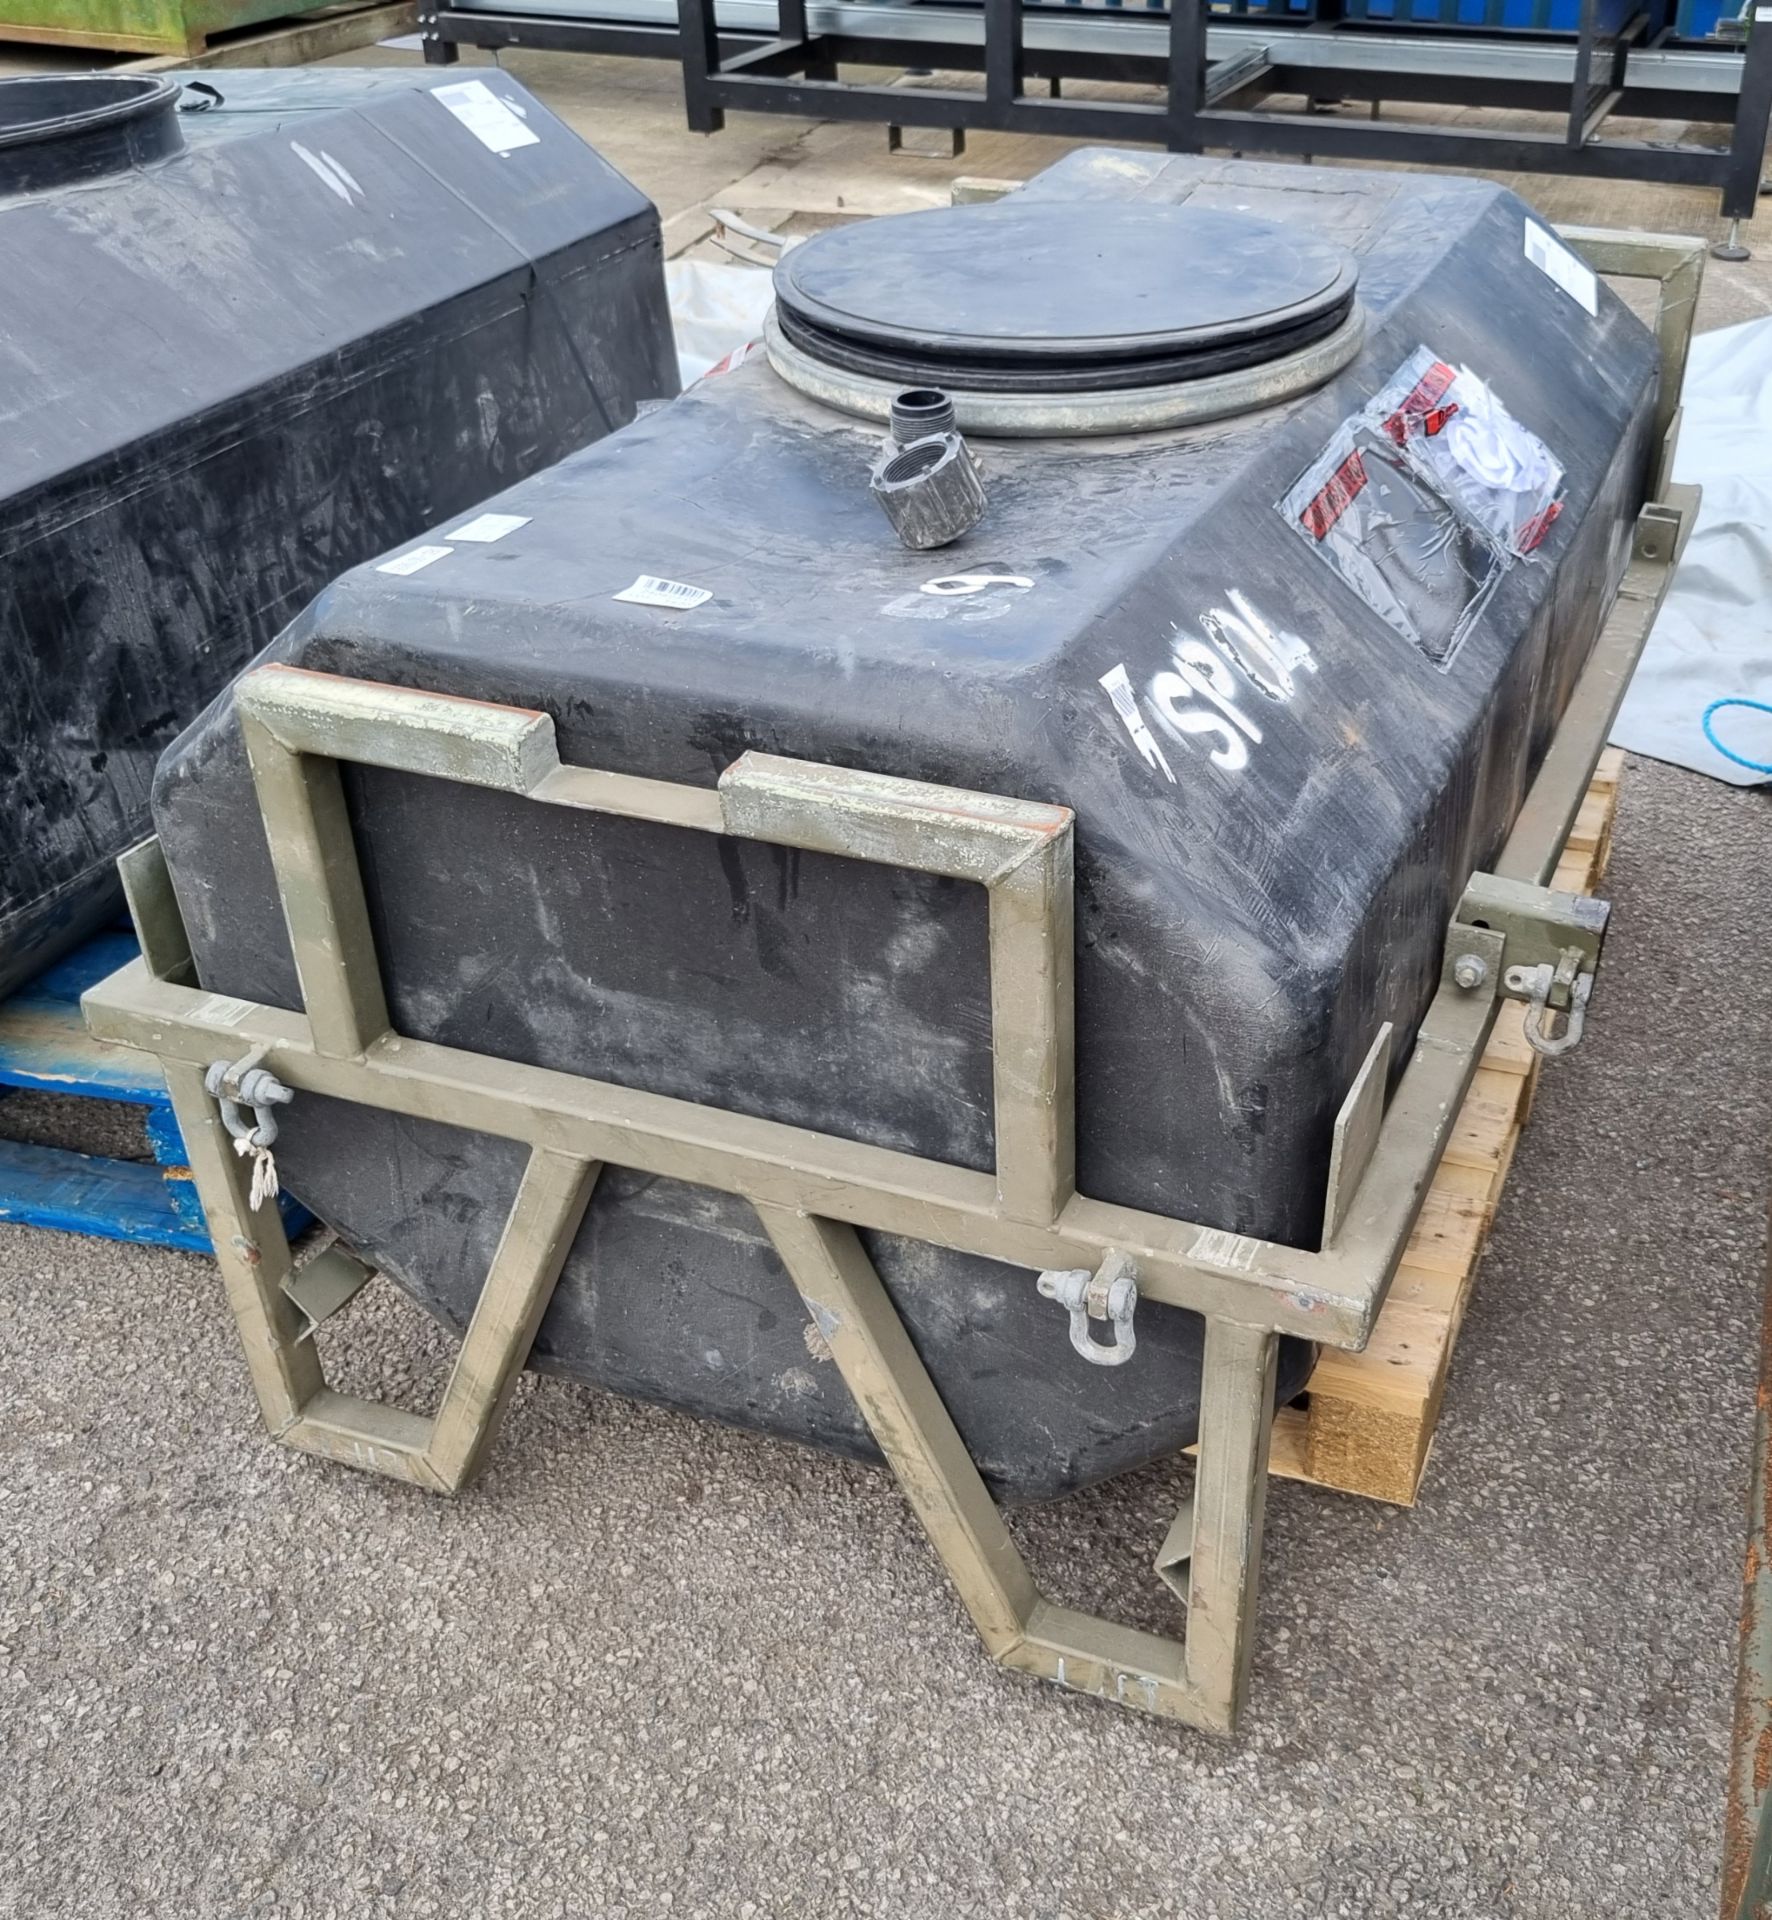 Mobile water storage tank with metal frame - L 1500 x D 1000 x H 800mm - Image 3 of 3